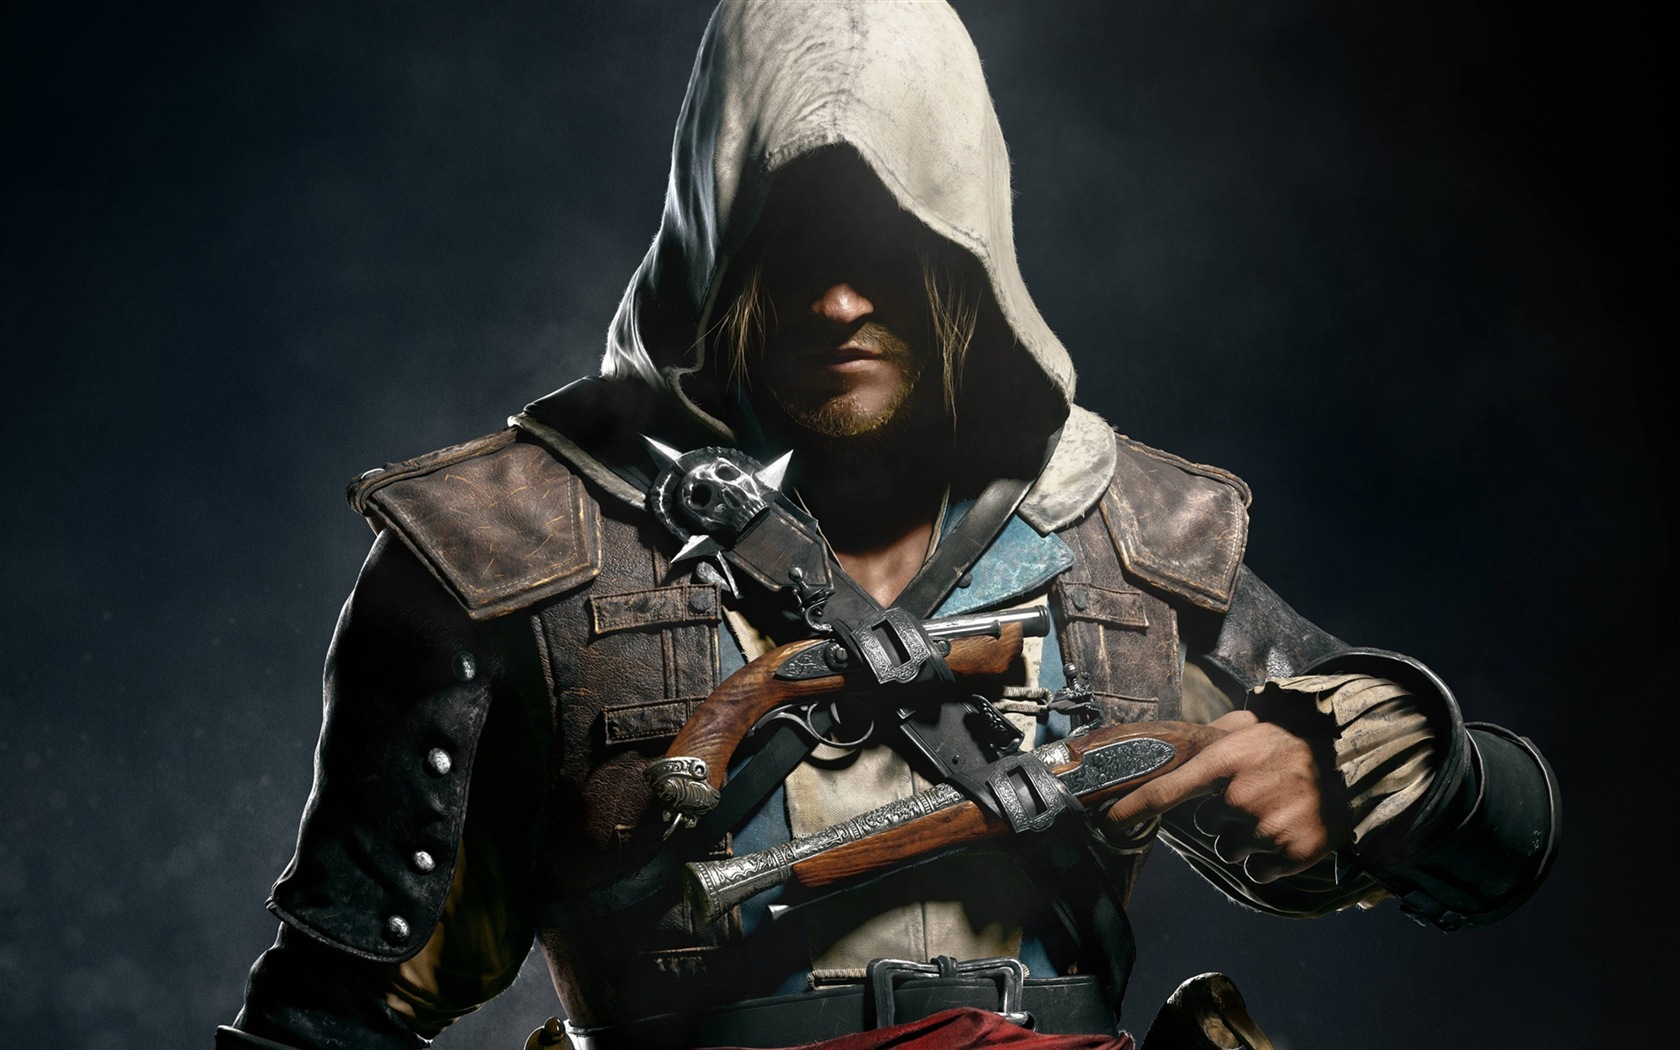 Creed IV Assassin: Black Flag HD wallpapers #13 - 1680x1050